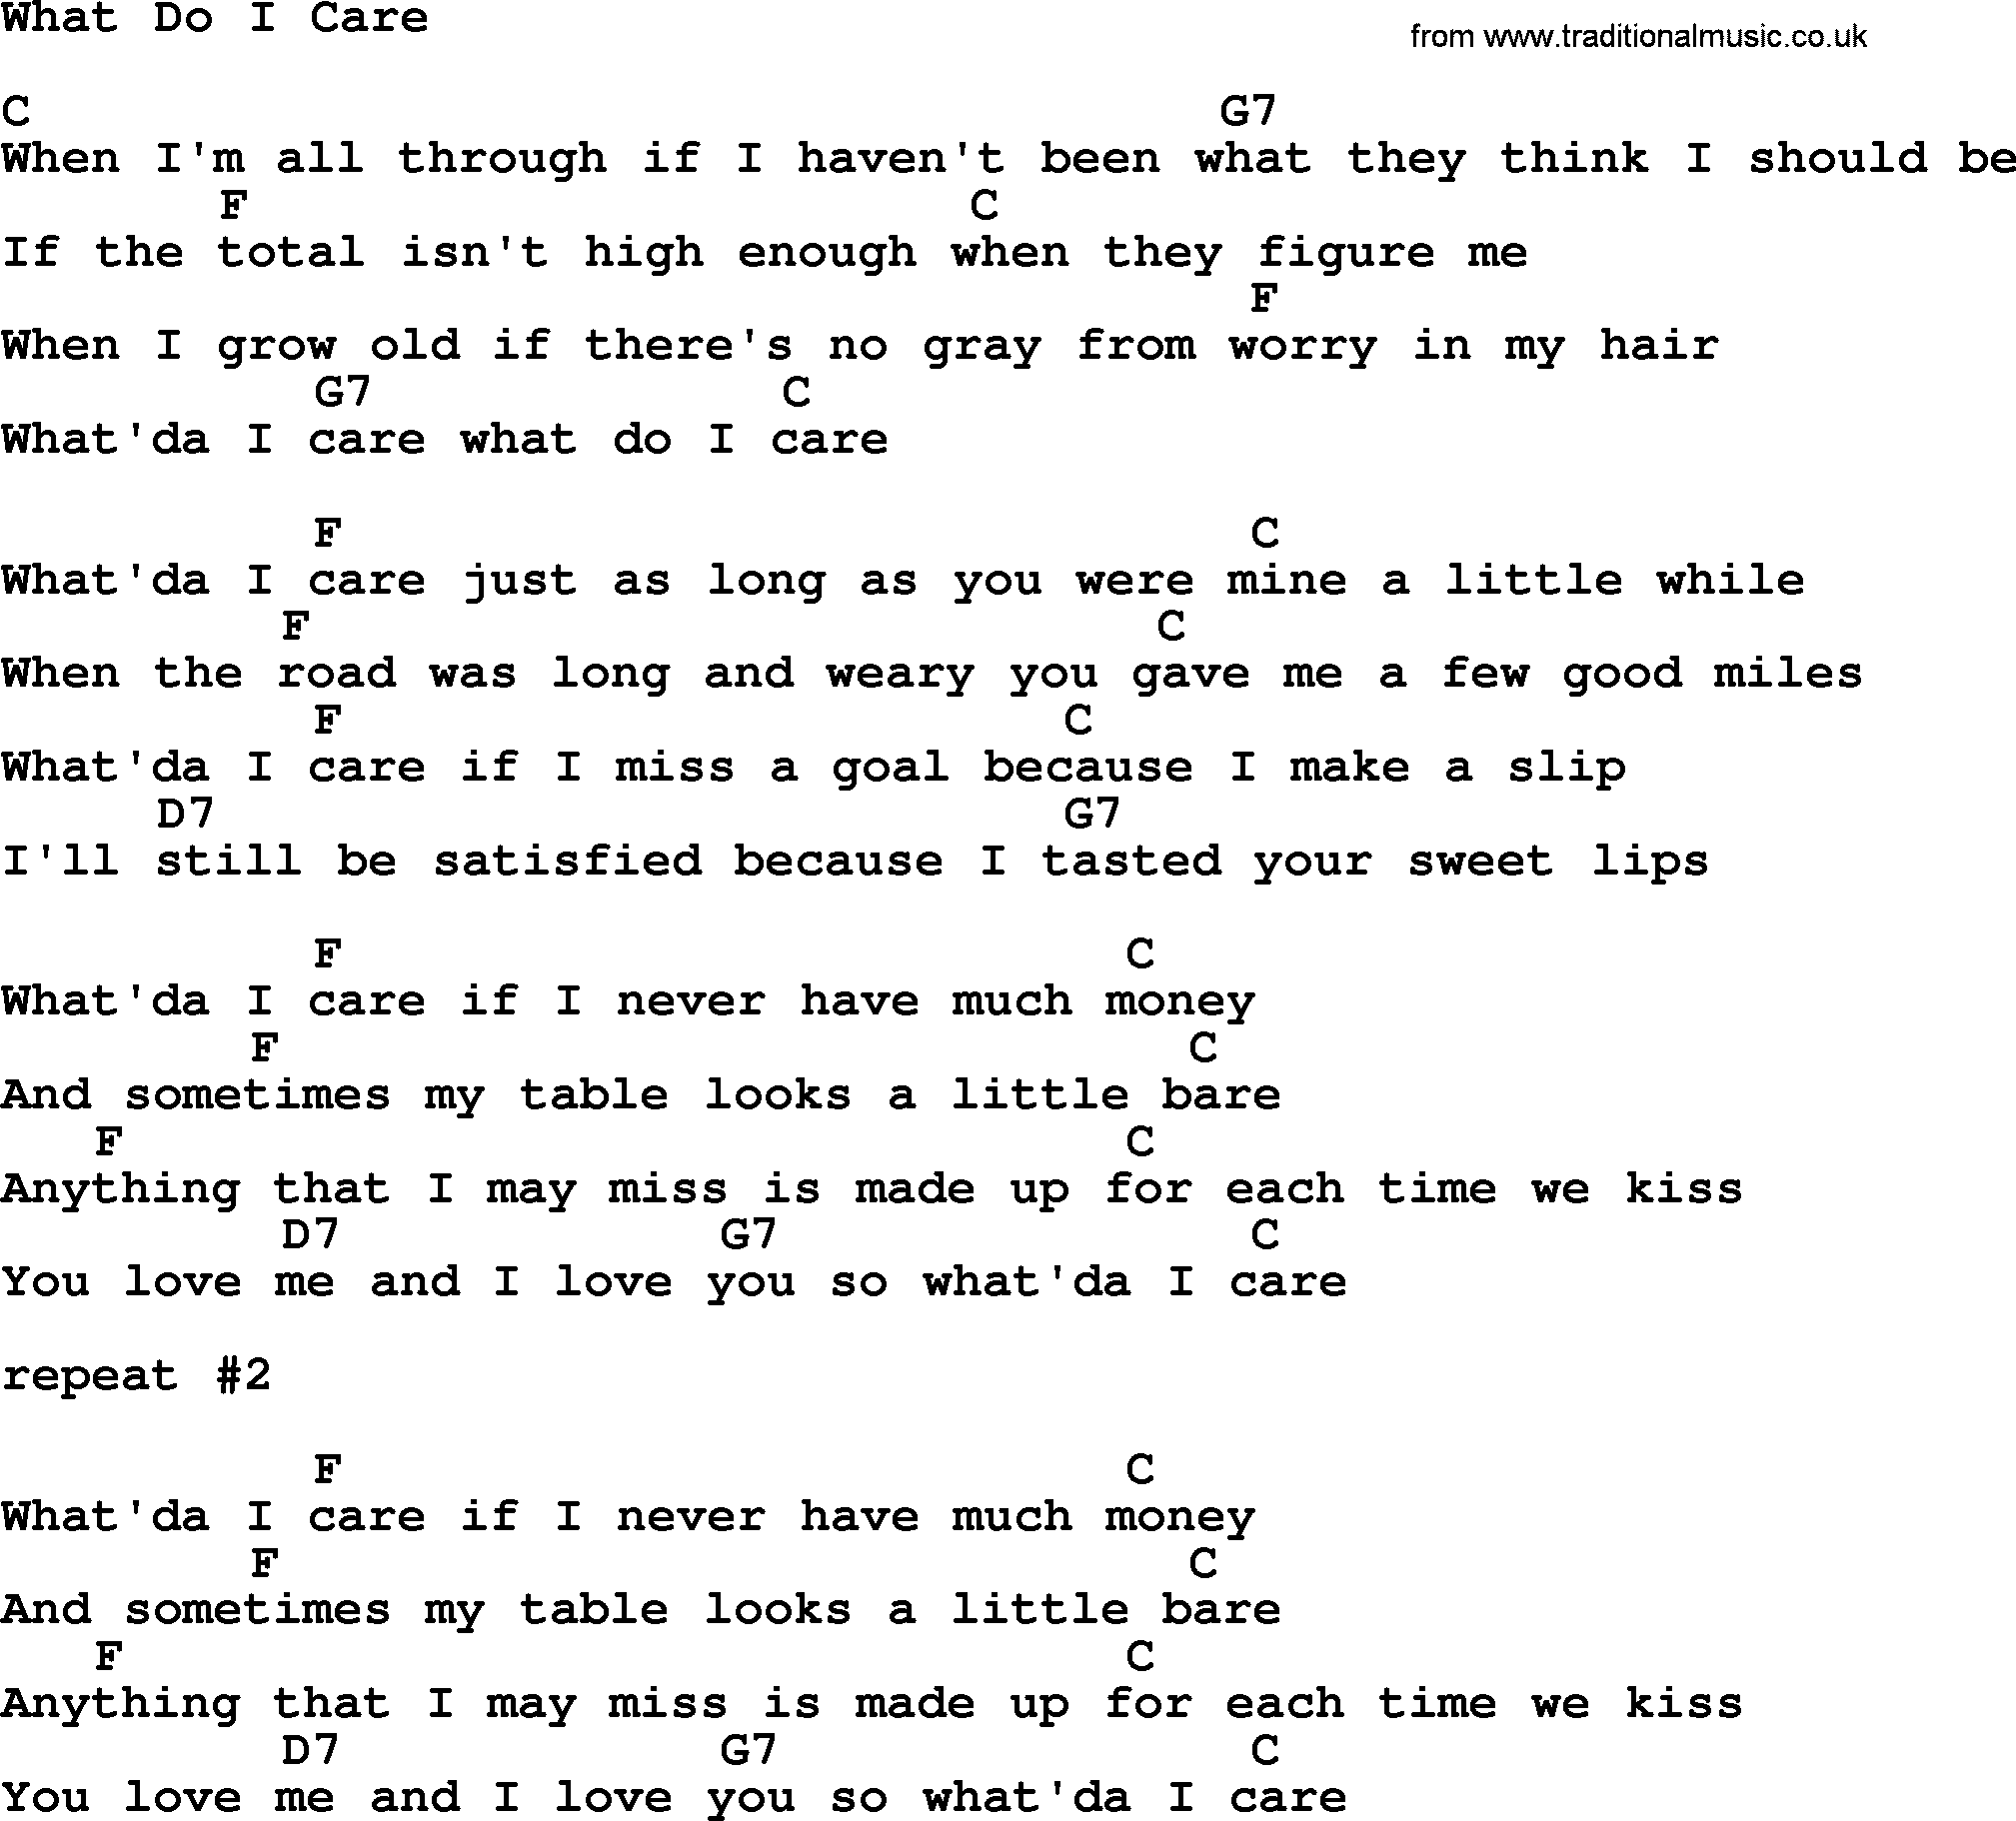 Johnny Cash song What Do I Care, lyrics and chords